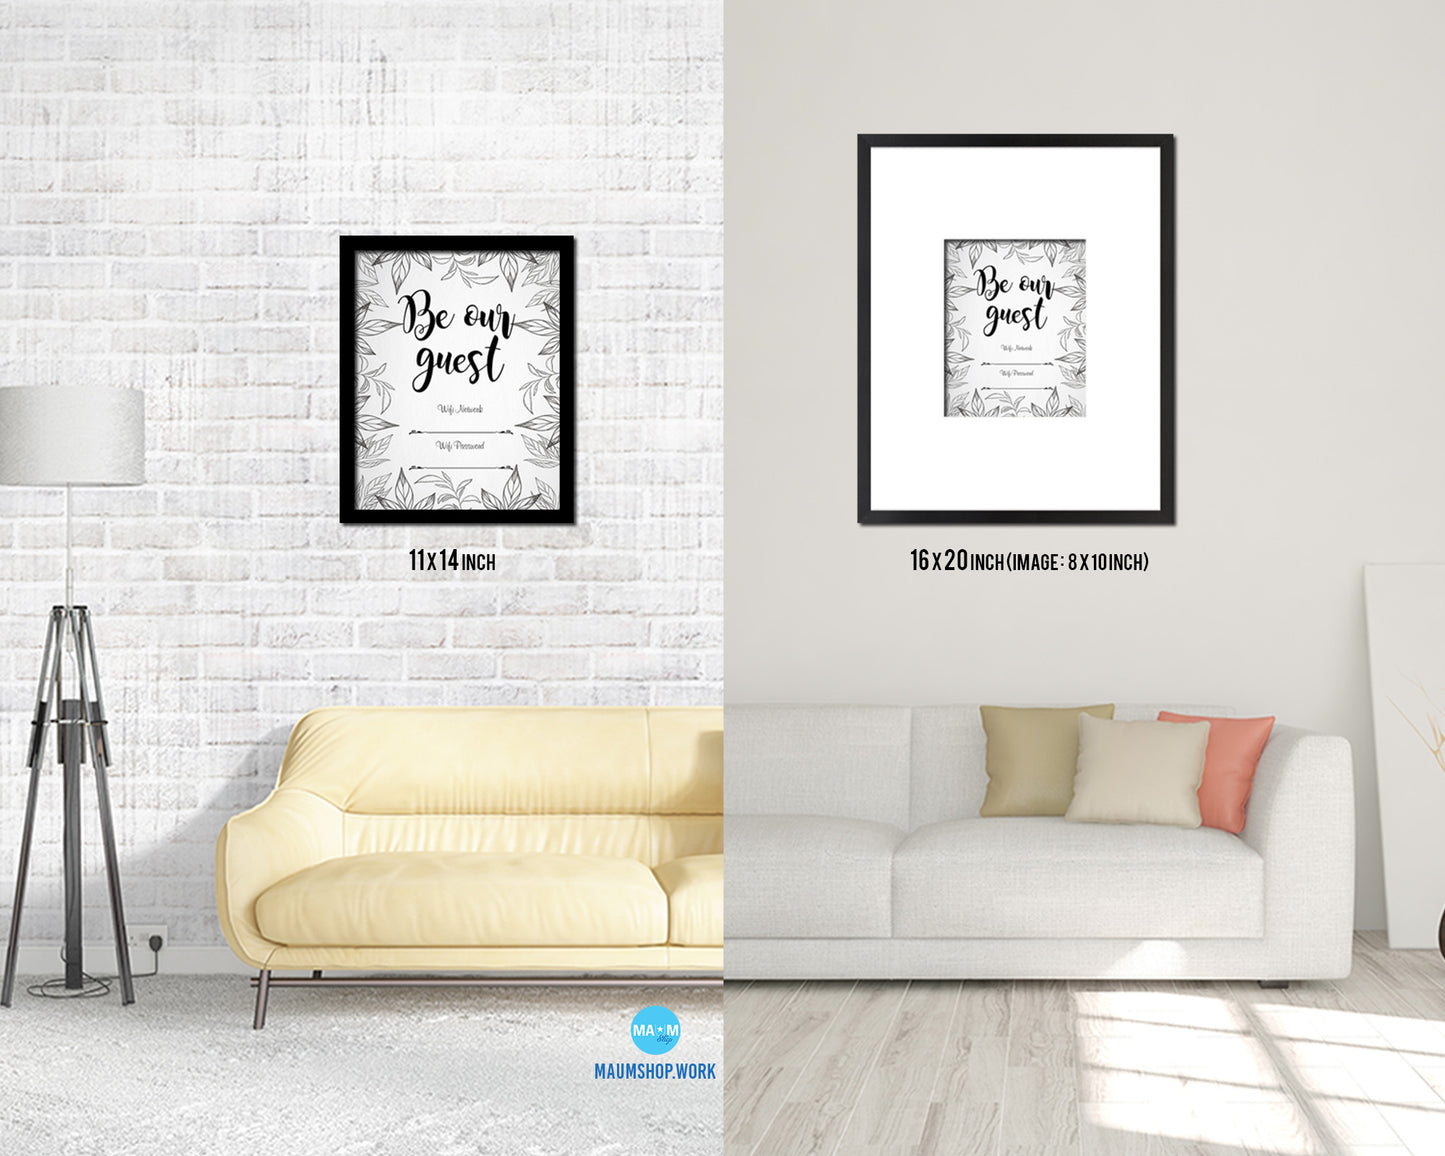 Be our guest Wifi network password Quote Framed Print Wall Decor Art Gifts